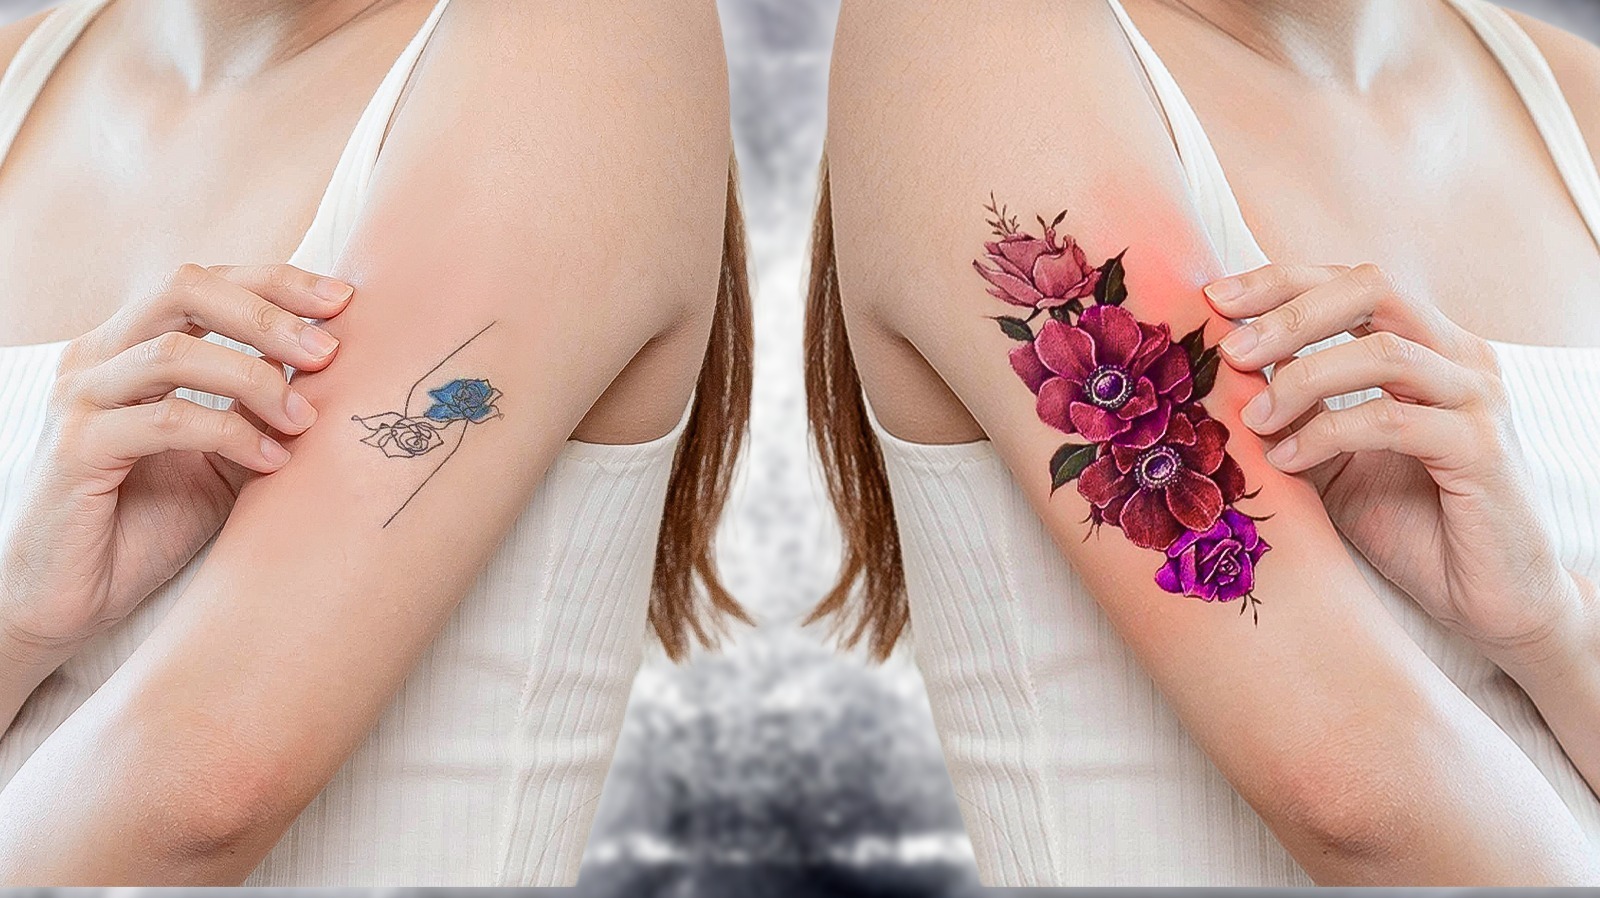 Tattoo Coverups and Tattoo Concealing